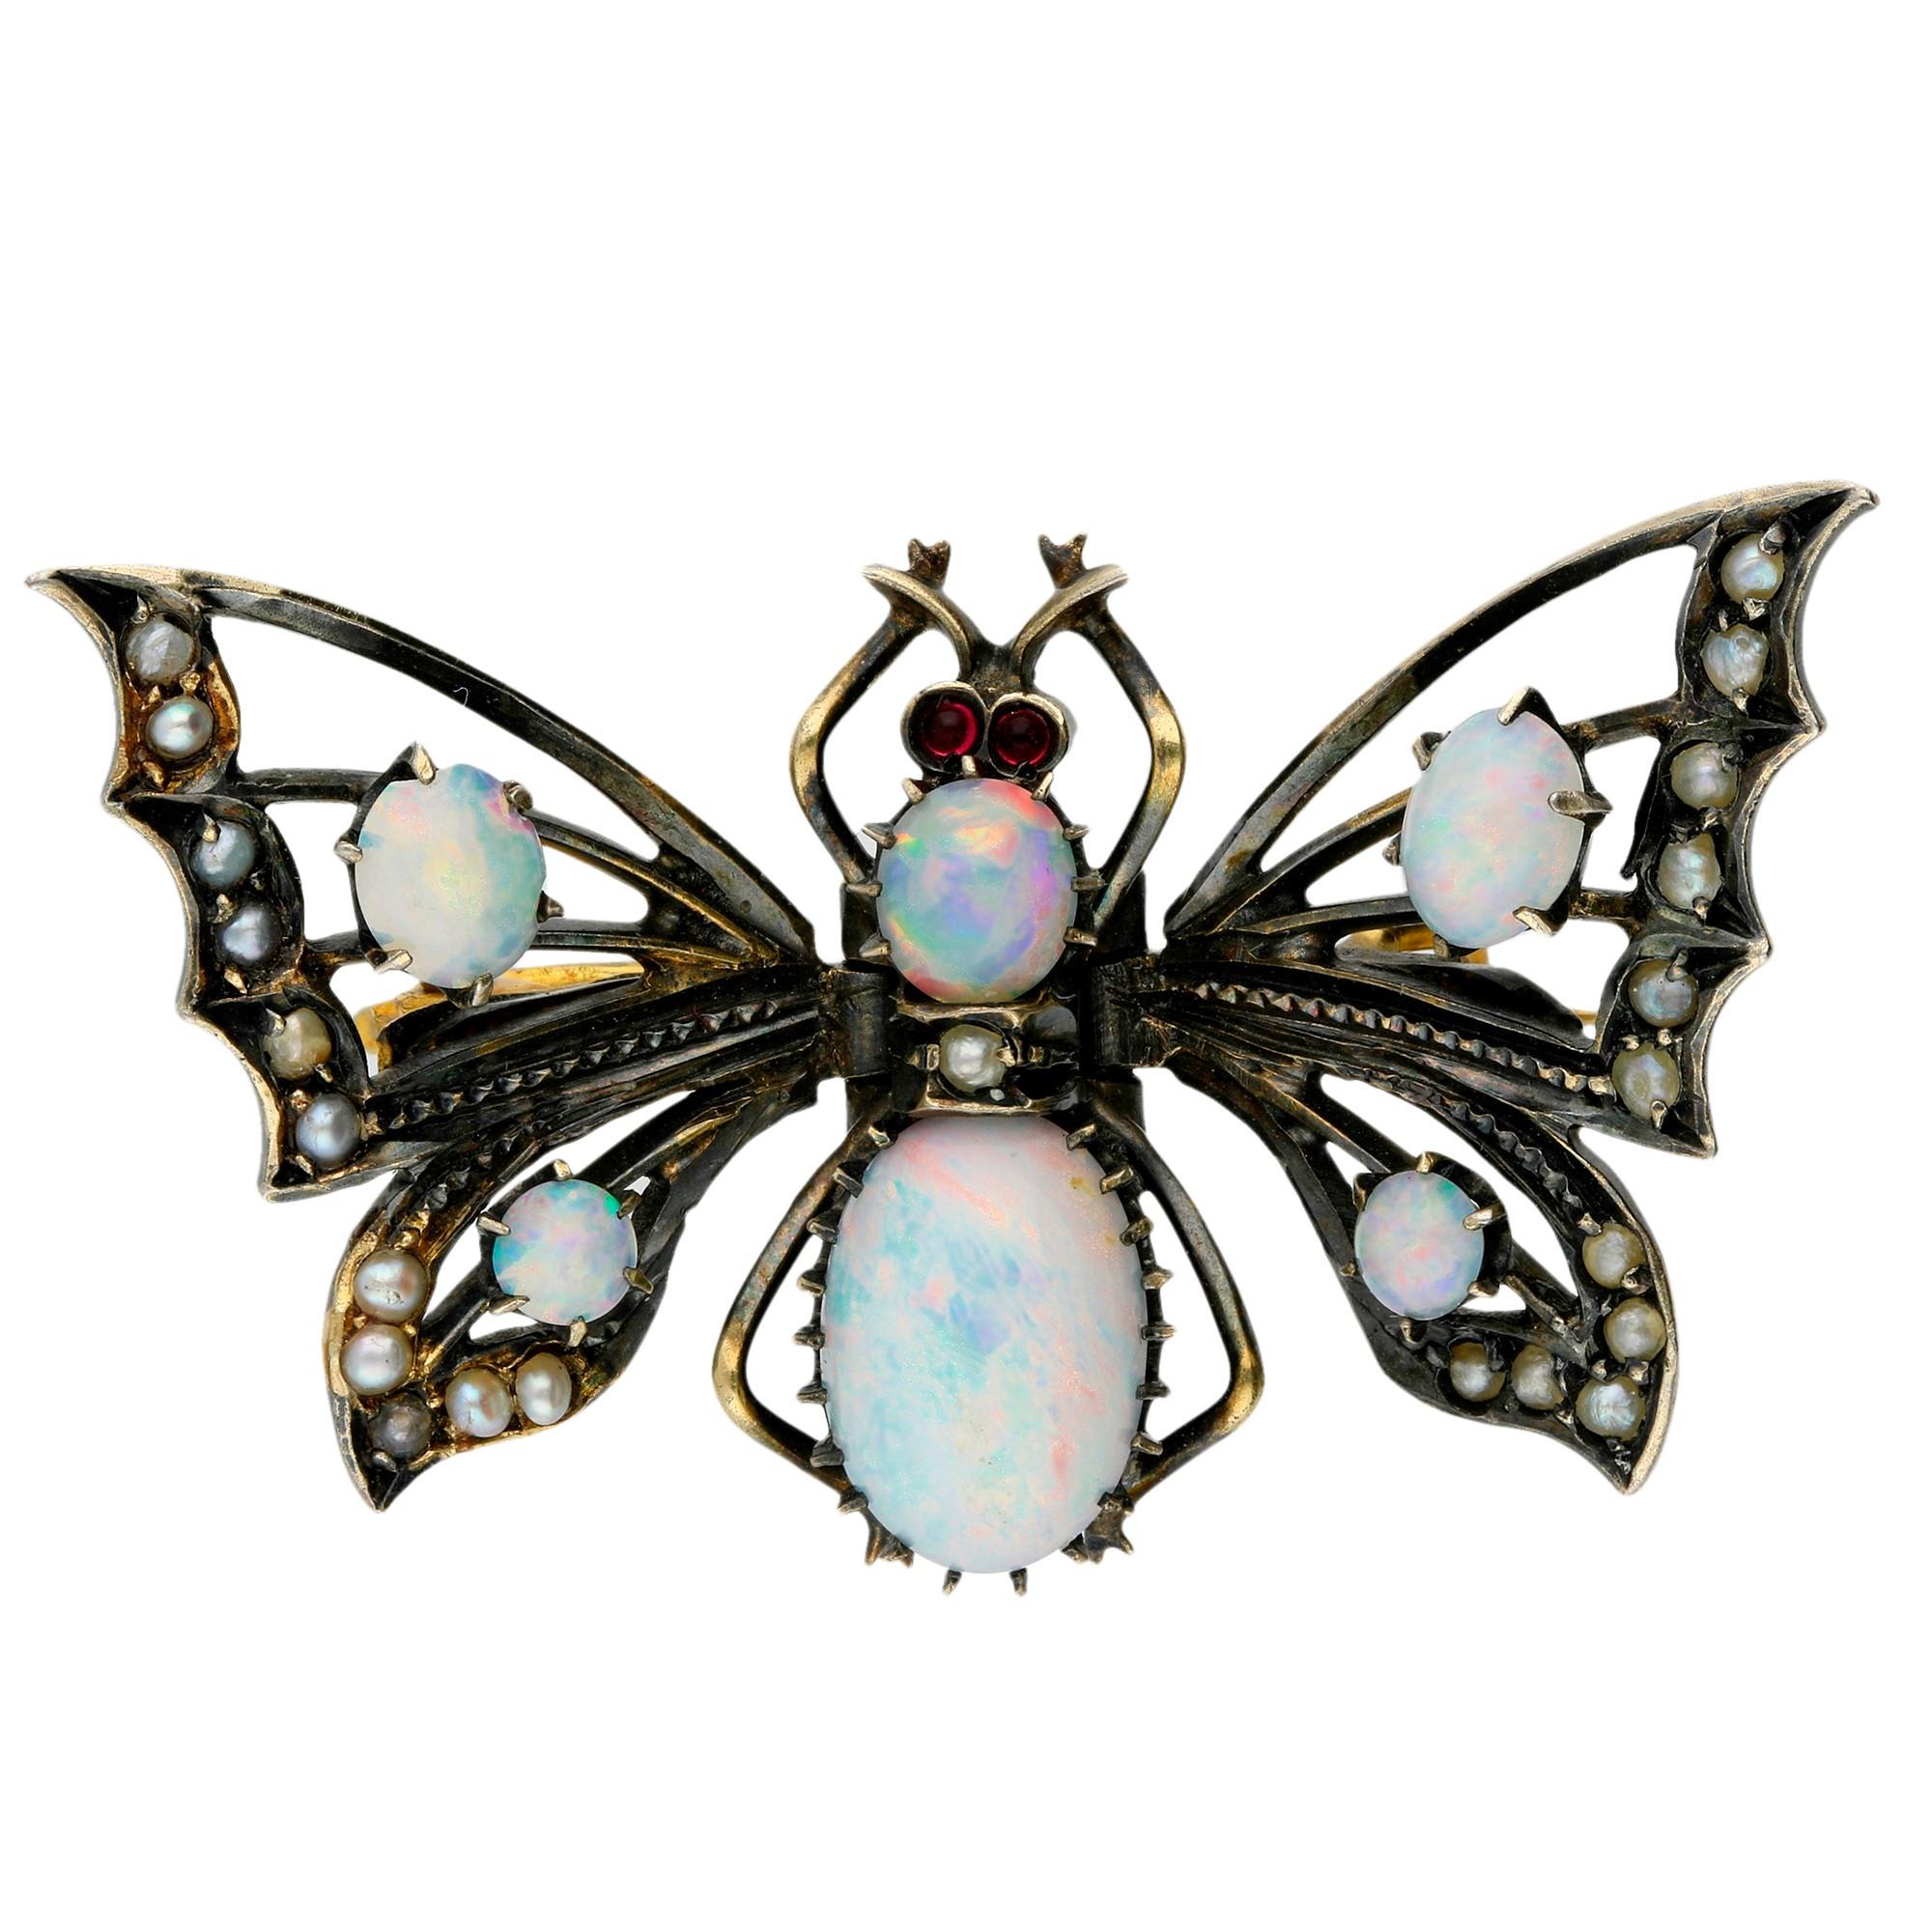 This beautiful butter fly brooch, with delicious opal highlights, to the beautifully crafted openwork wings, enhanced by the gorgeous split pearl trim.

A lovely gift for an October birthday.

SPECIFICATION
Weight (grams)	6.10
Fineness	Fine